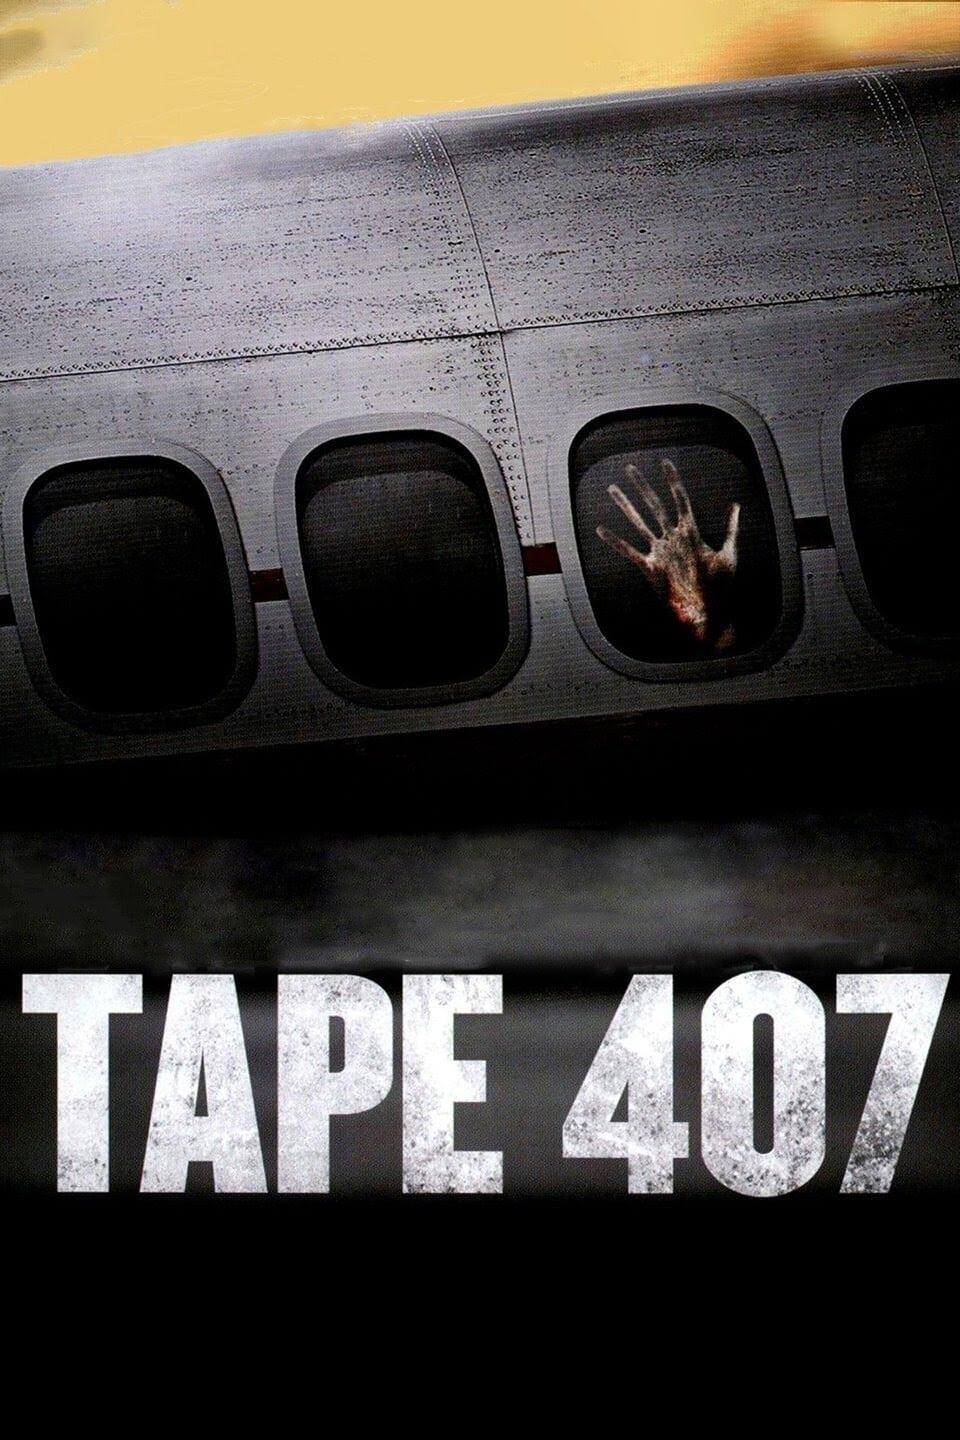 Tape 407 poster